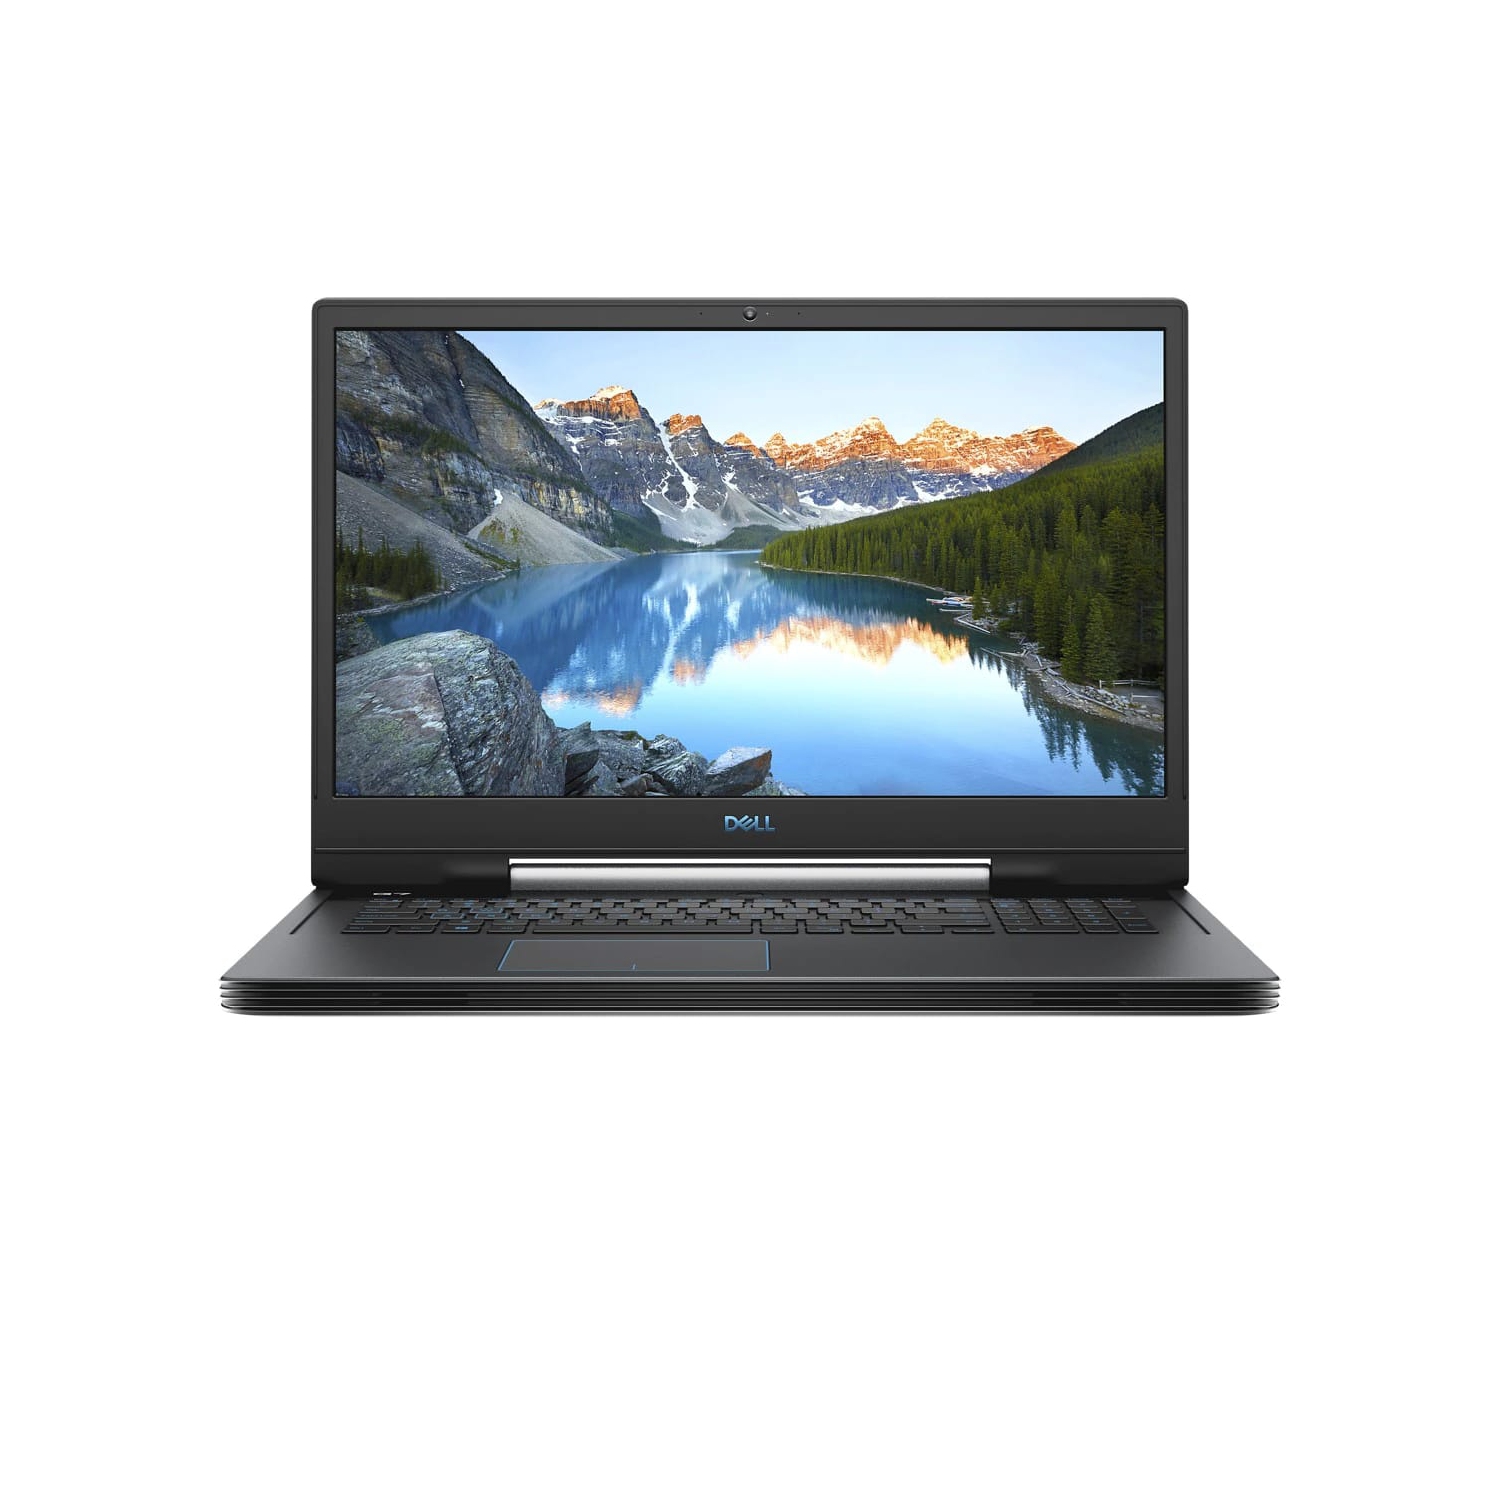 Refurbished (Excellent) – Dell G7 7790 Gaming Laptop (2019) | 17.3" FHD | Core i7 - 256GB SSD + 1TB HDD - 16GB RAM | 6 Cores @ 4.1 GHz